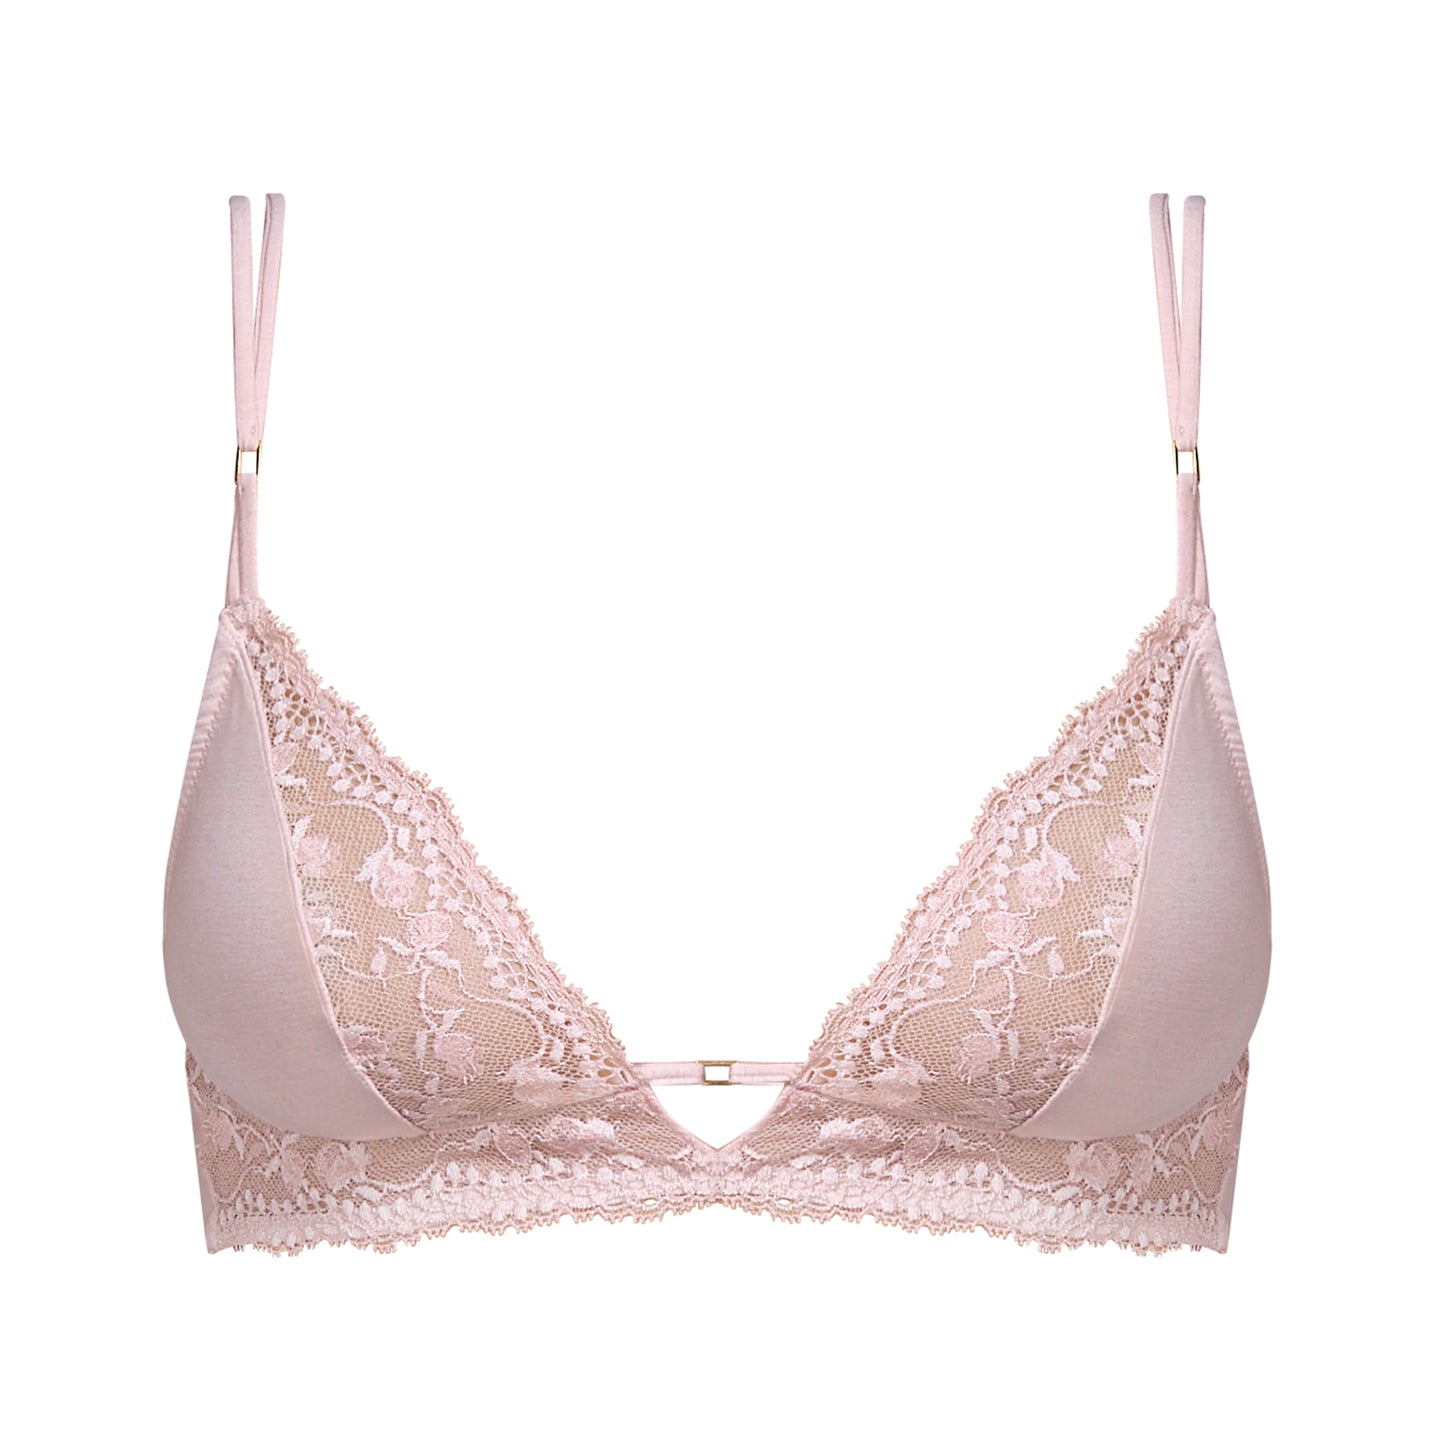 Andres Sarda Raven volle cup bh zonder beugels Rose Mist